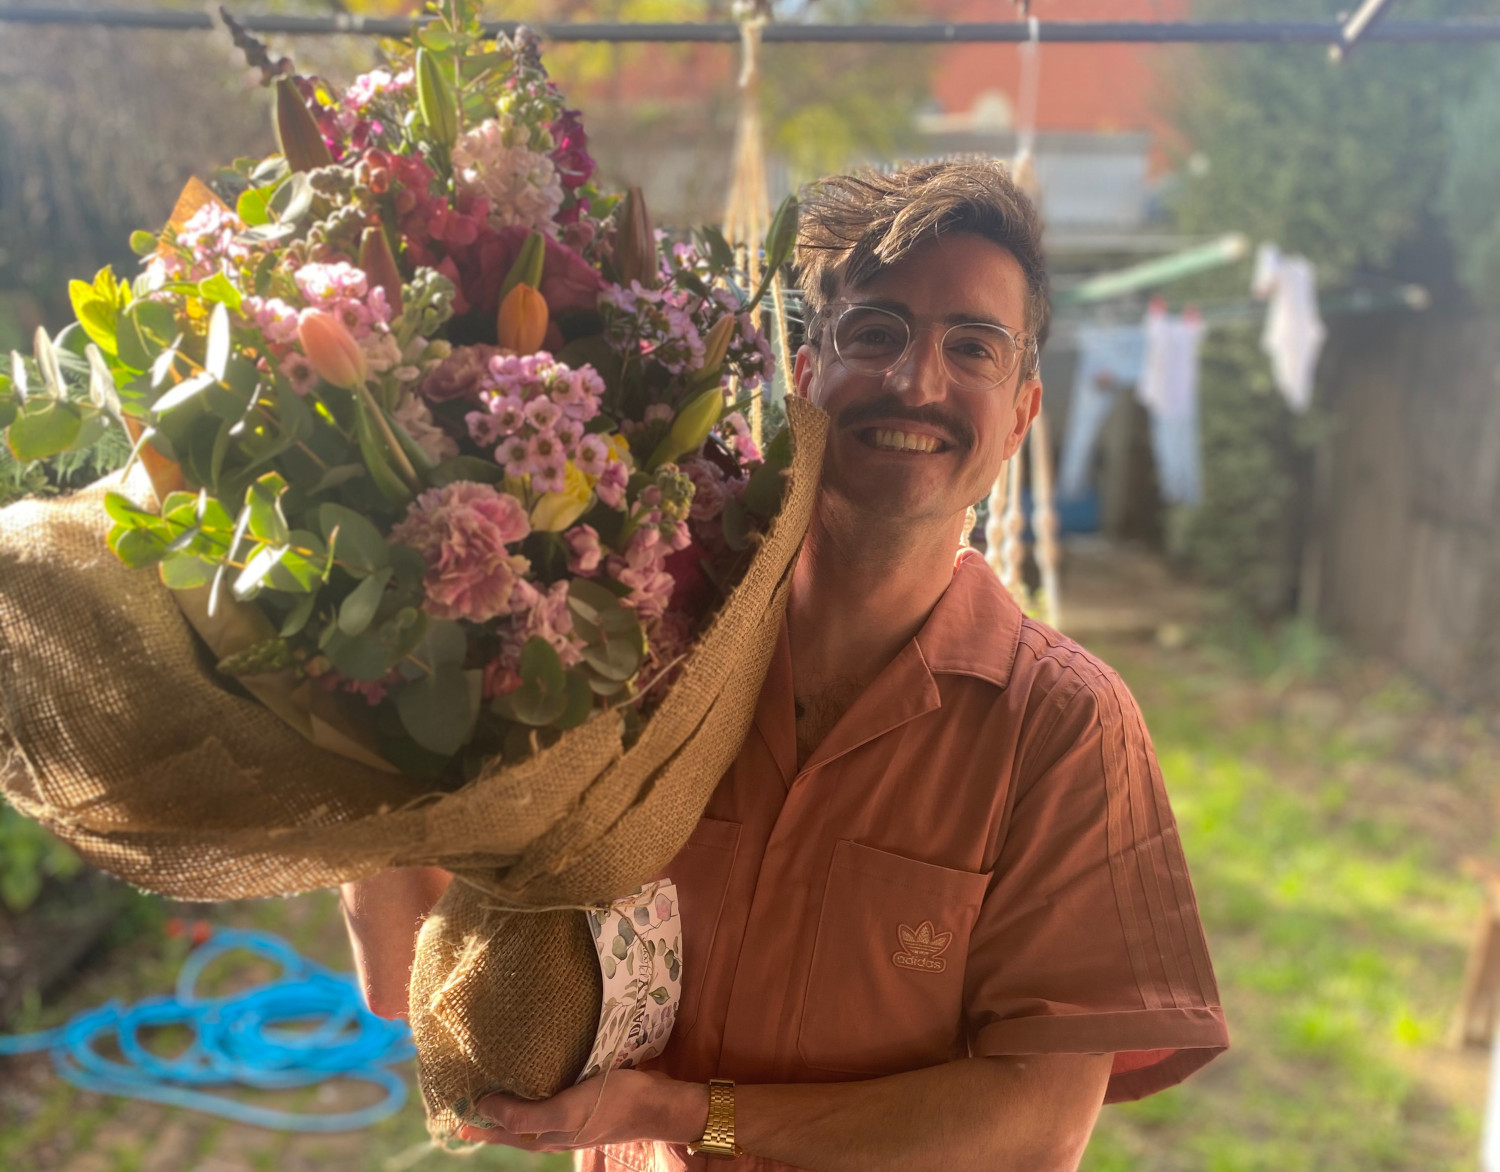 Martin holding a massive bunch of flowers